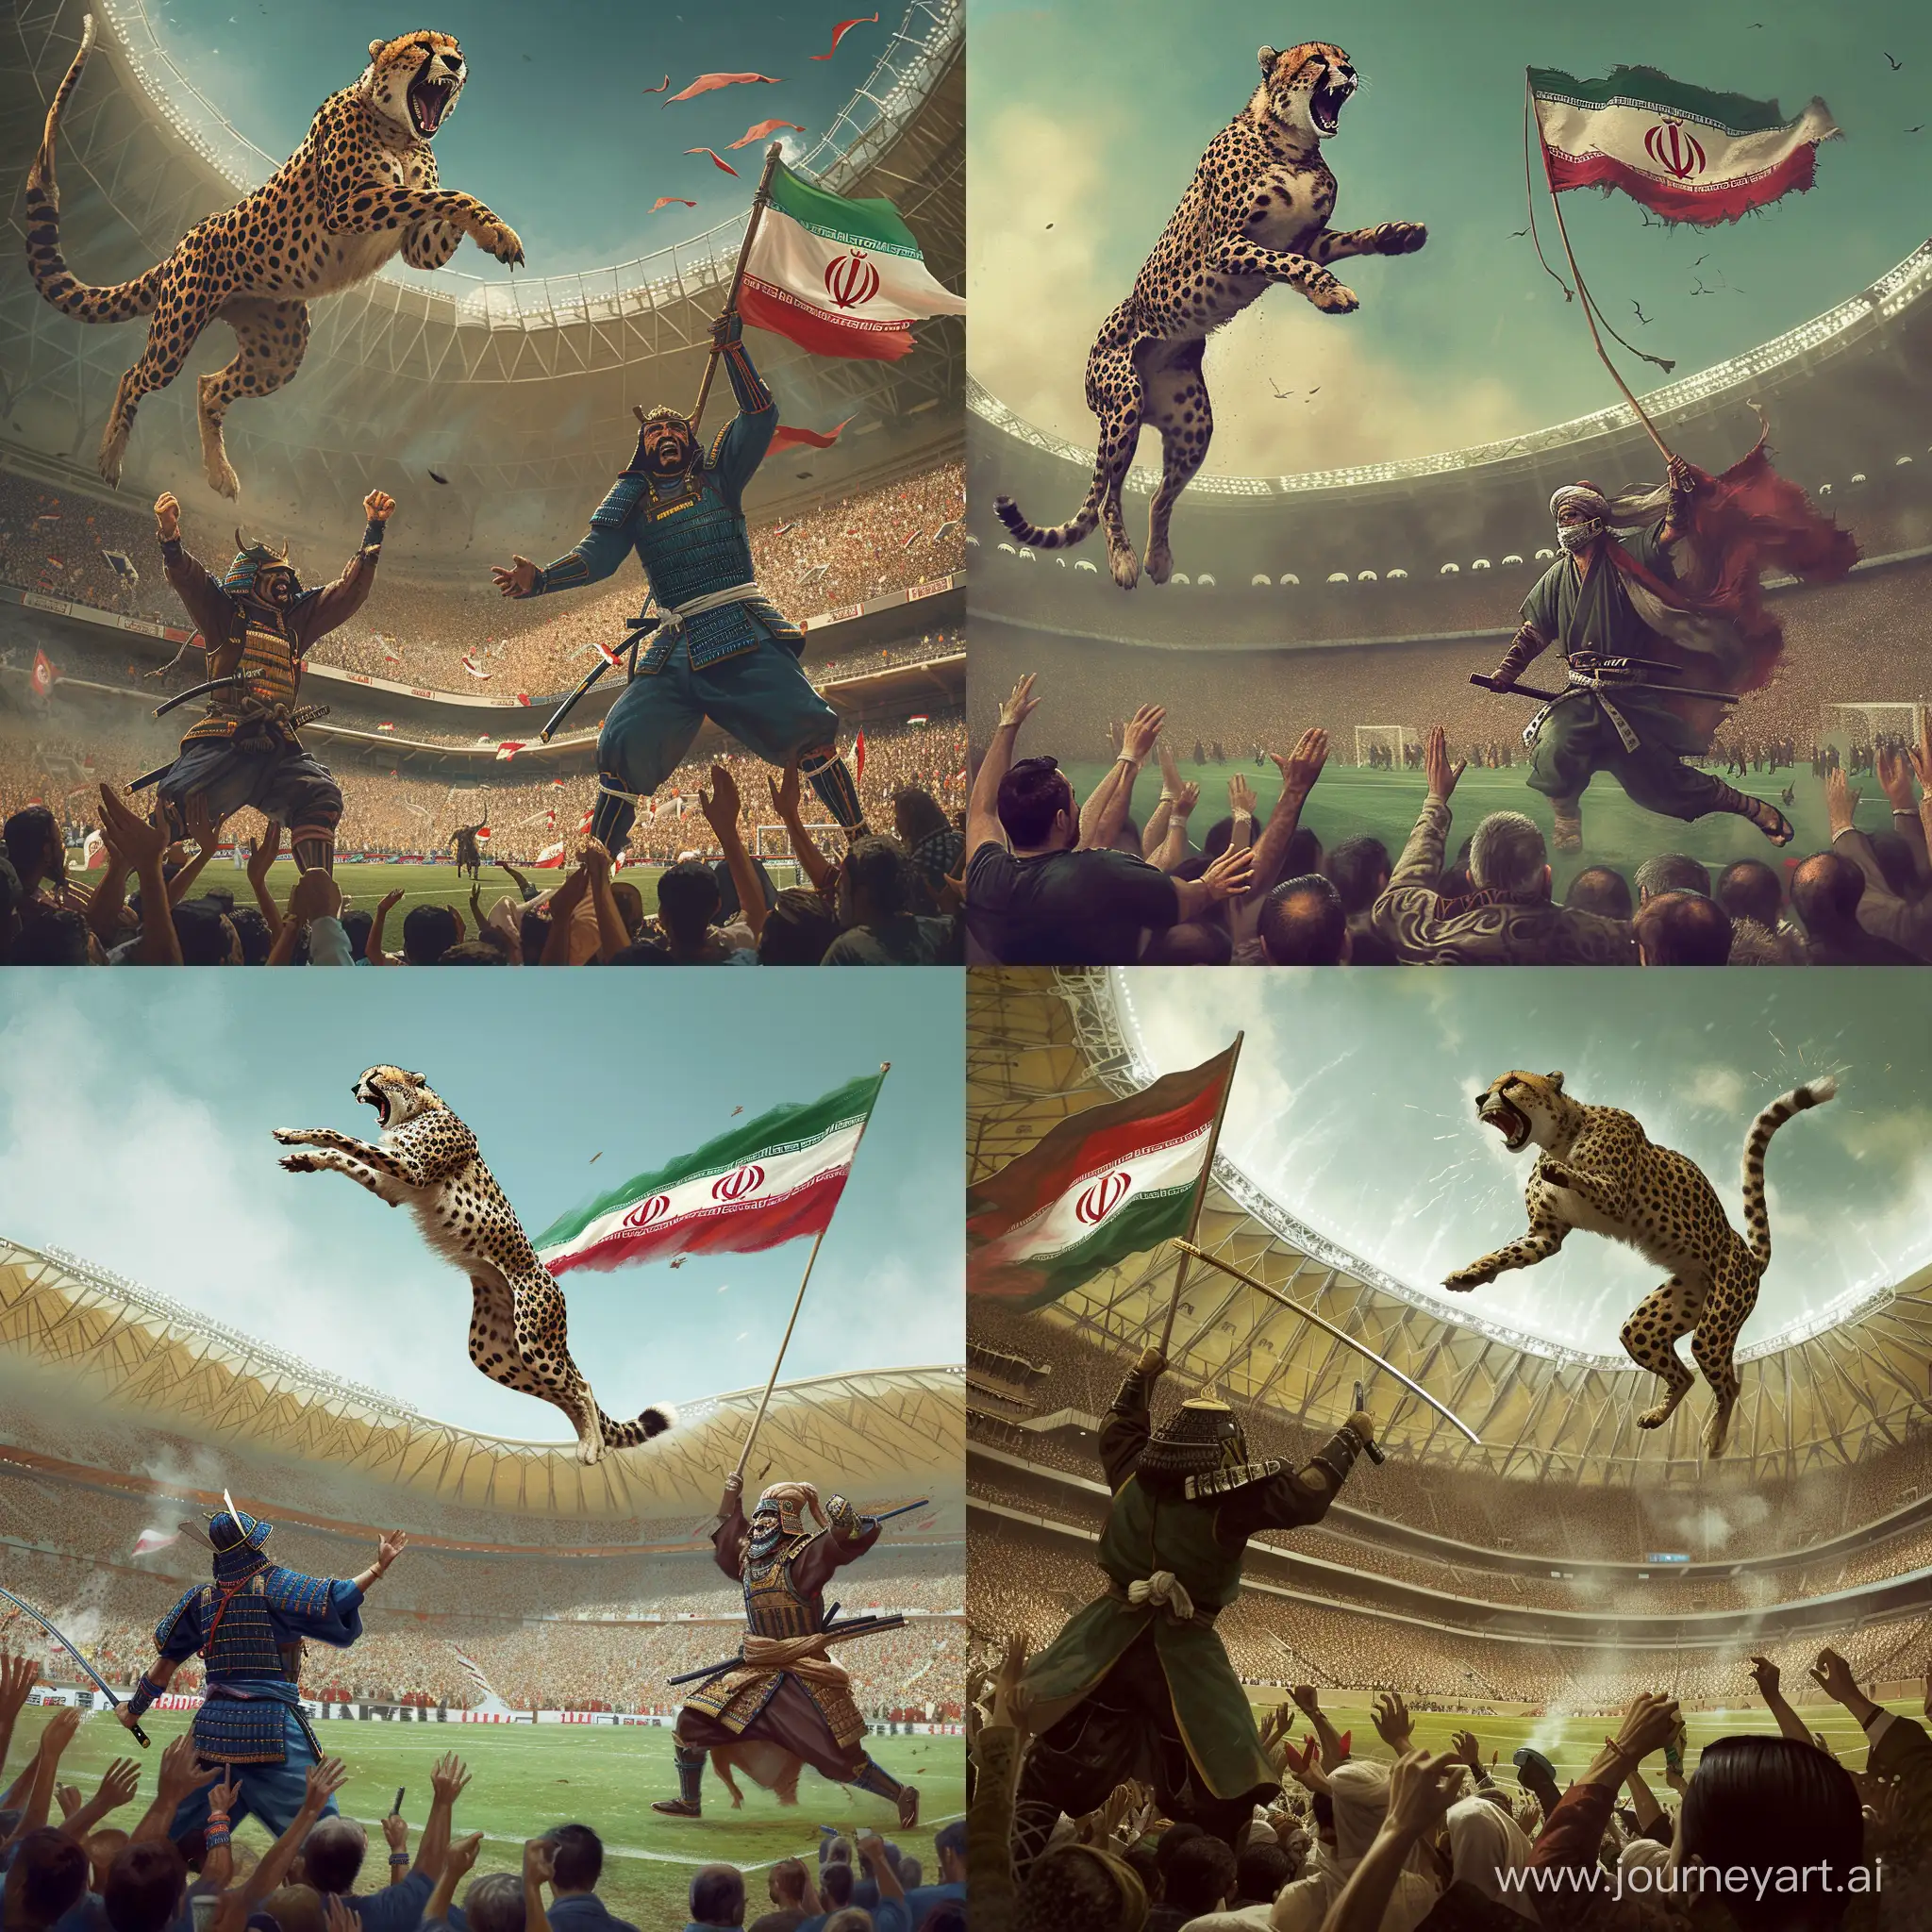 an angry asiatic cheetah jumping and prowling a samurai, this happens in a football field and everyone in stadium are applausing Iran football team and swinging Iran's flag.